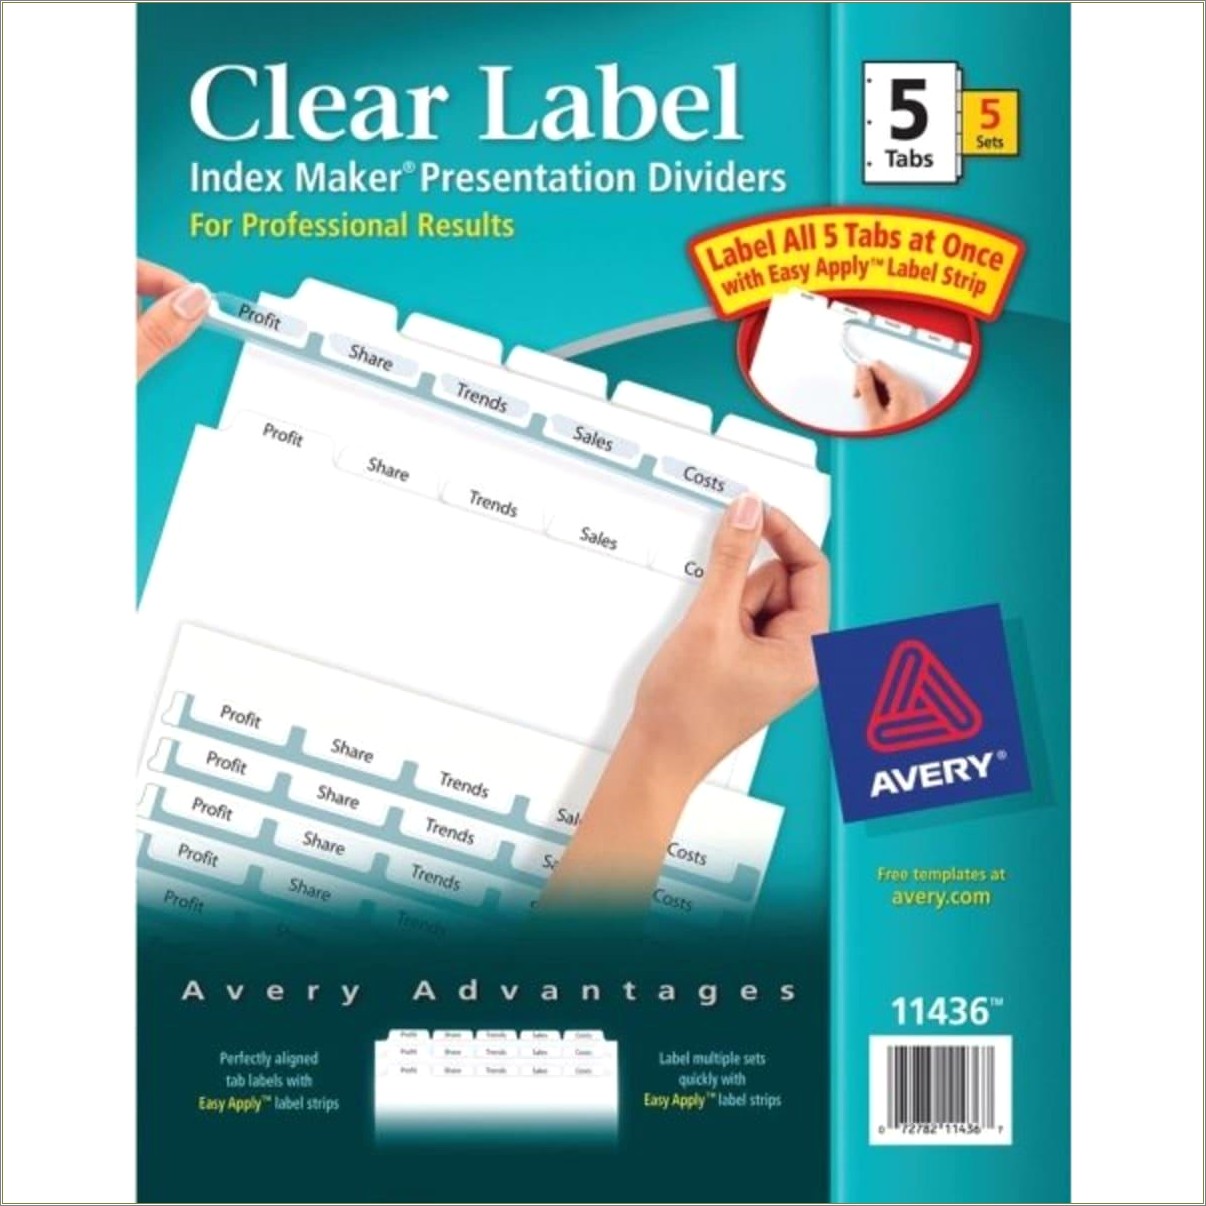 Free Easy Apply Label Strip Template Avery